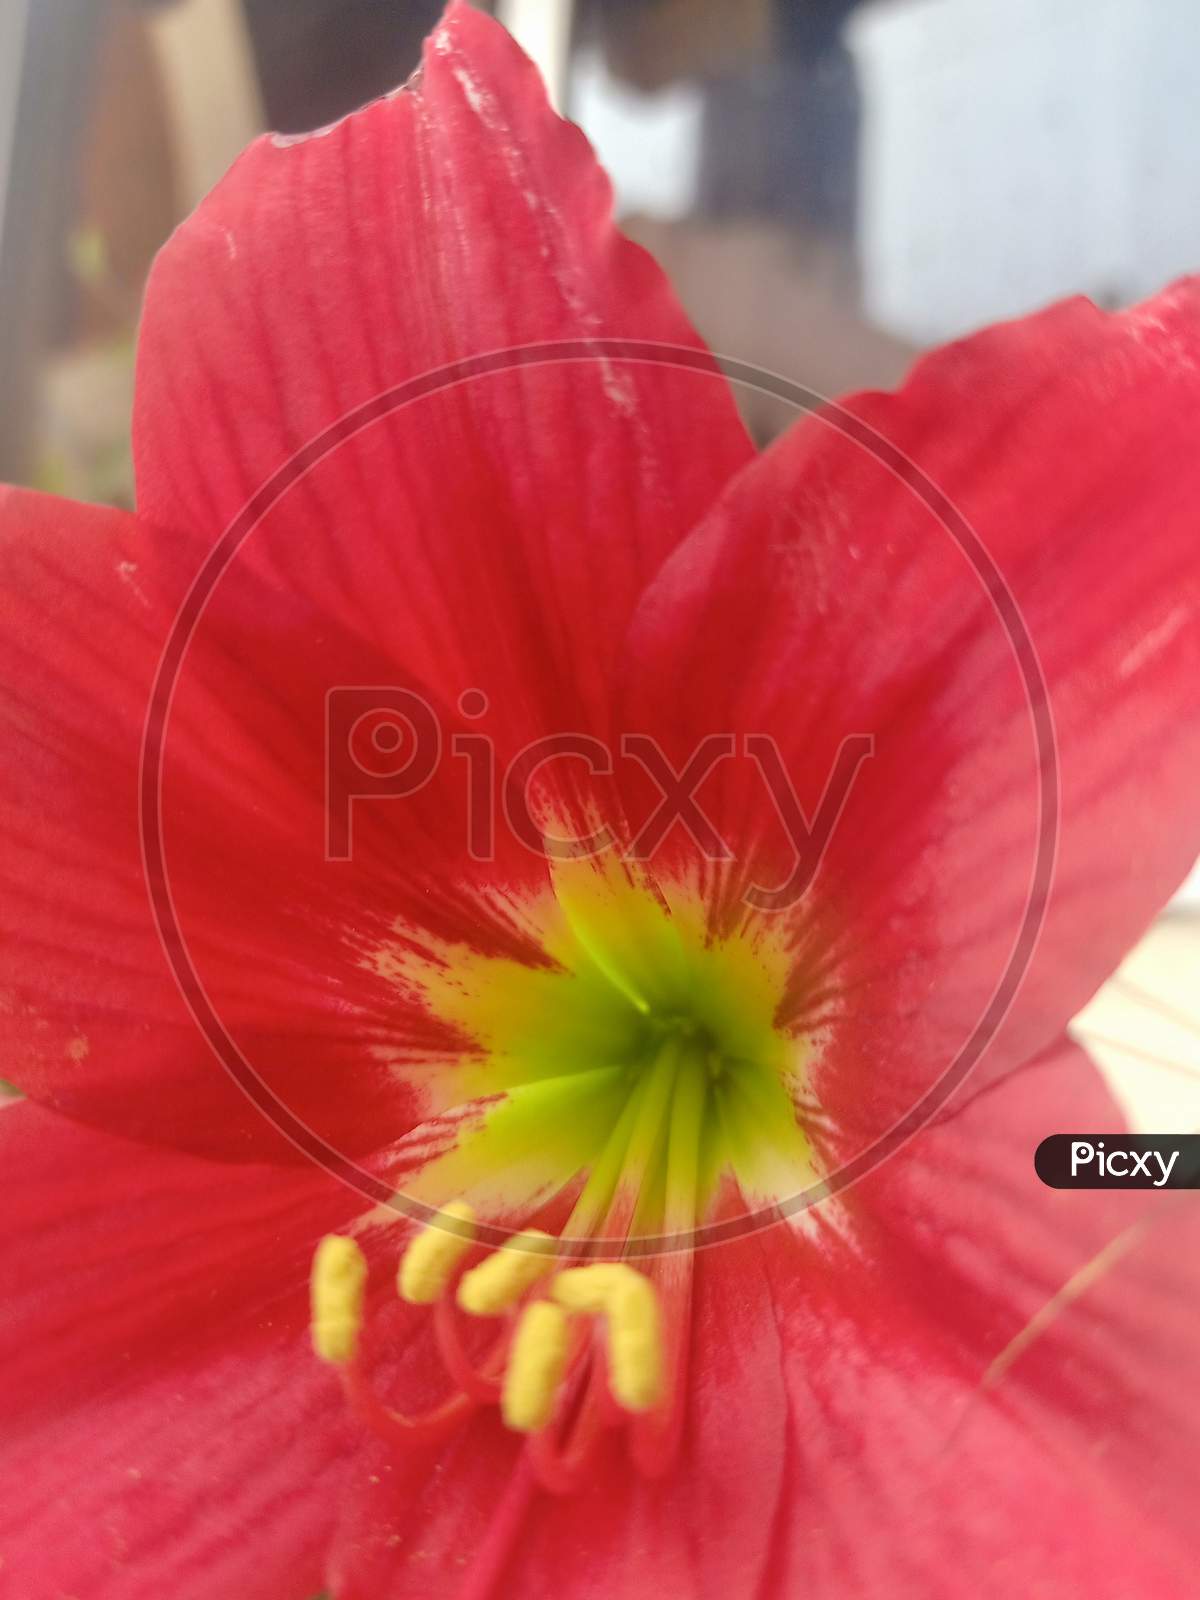 beautifully Red Lilly flowers, Lilium, lily.